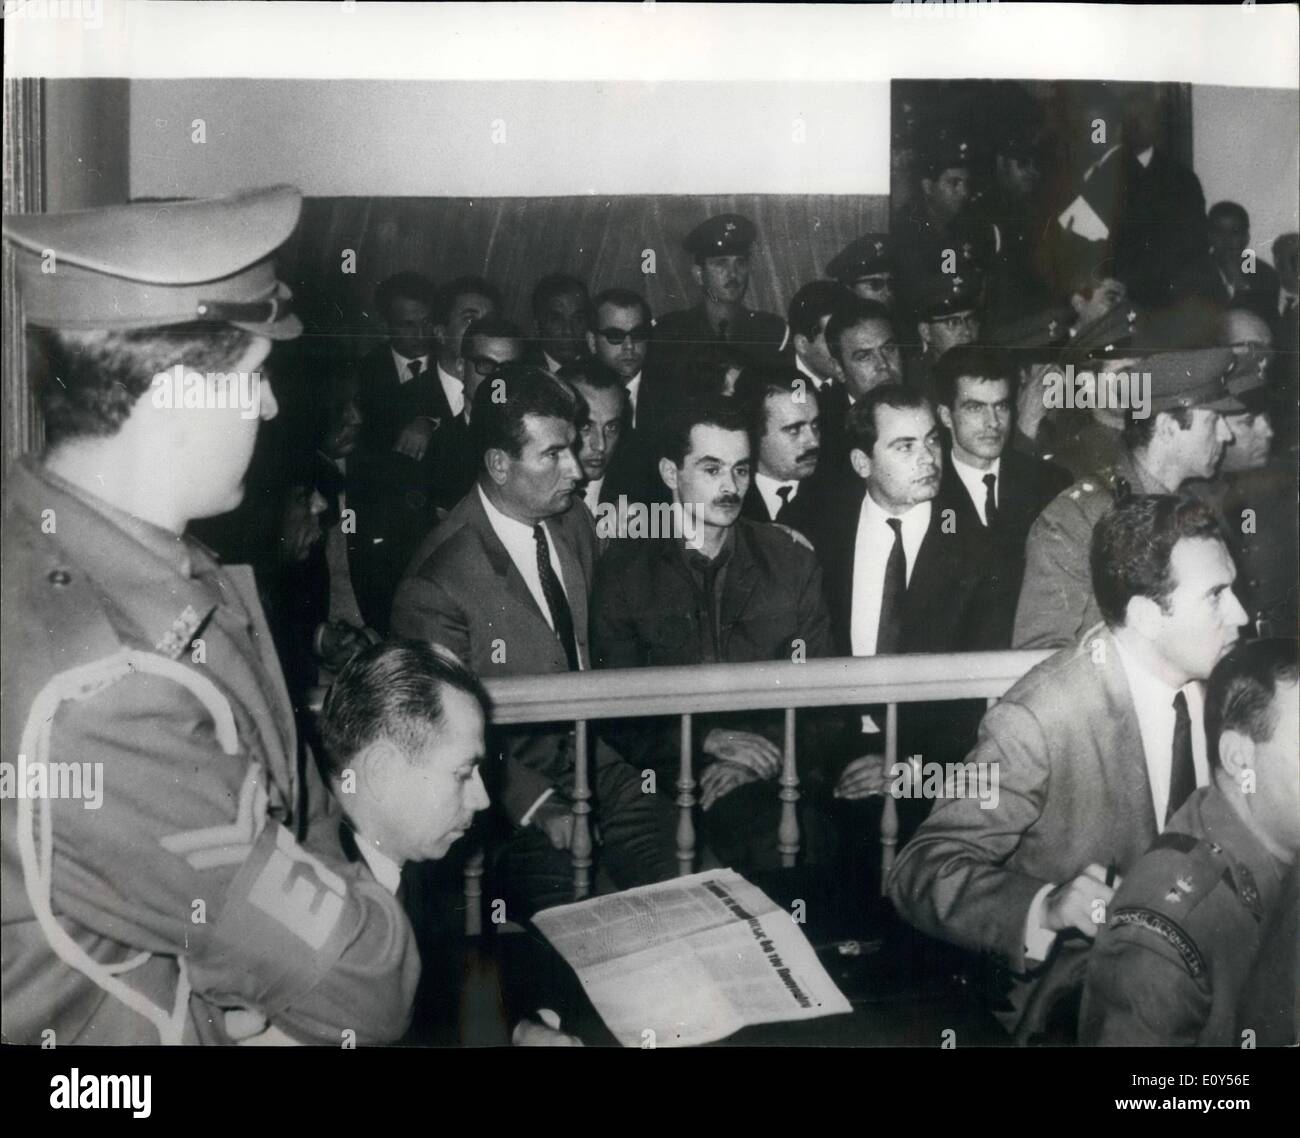 Nov. 11, 1968 - 15 ON BOMB PLT CHARGES IN ATHENS, Alexandros Panagoulis, accused of being the leader of a plot to assassinate Mx. Papadopouloe, the Greek Prime Minister, told a court martial, whioh opened in Athens on Nov 4, that he had been tortured eon the lines of the Spanish Inquisition'' during 82 days detention. on trial with Panagoulie, were 14 youth. said to have helped him in the abortive bomb attempt on Aug. 13 Stock Photo